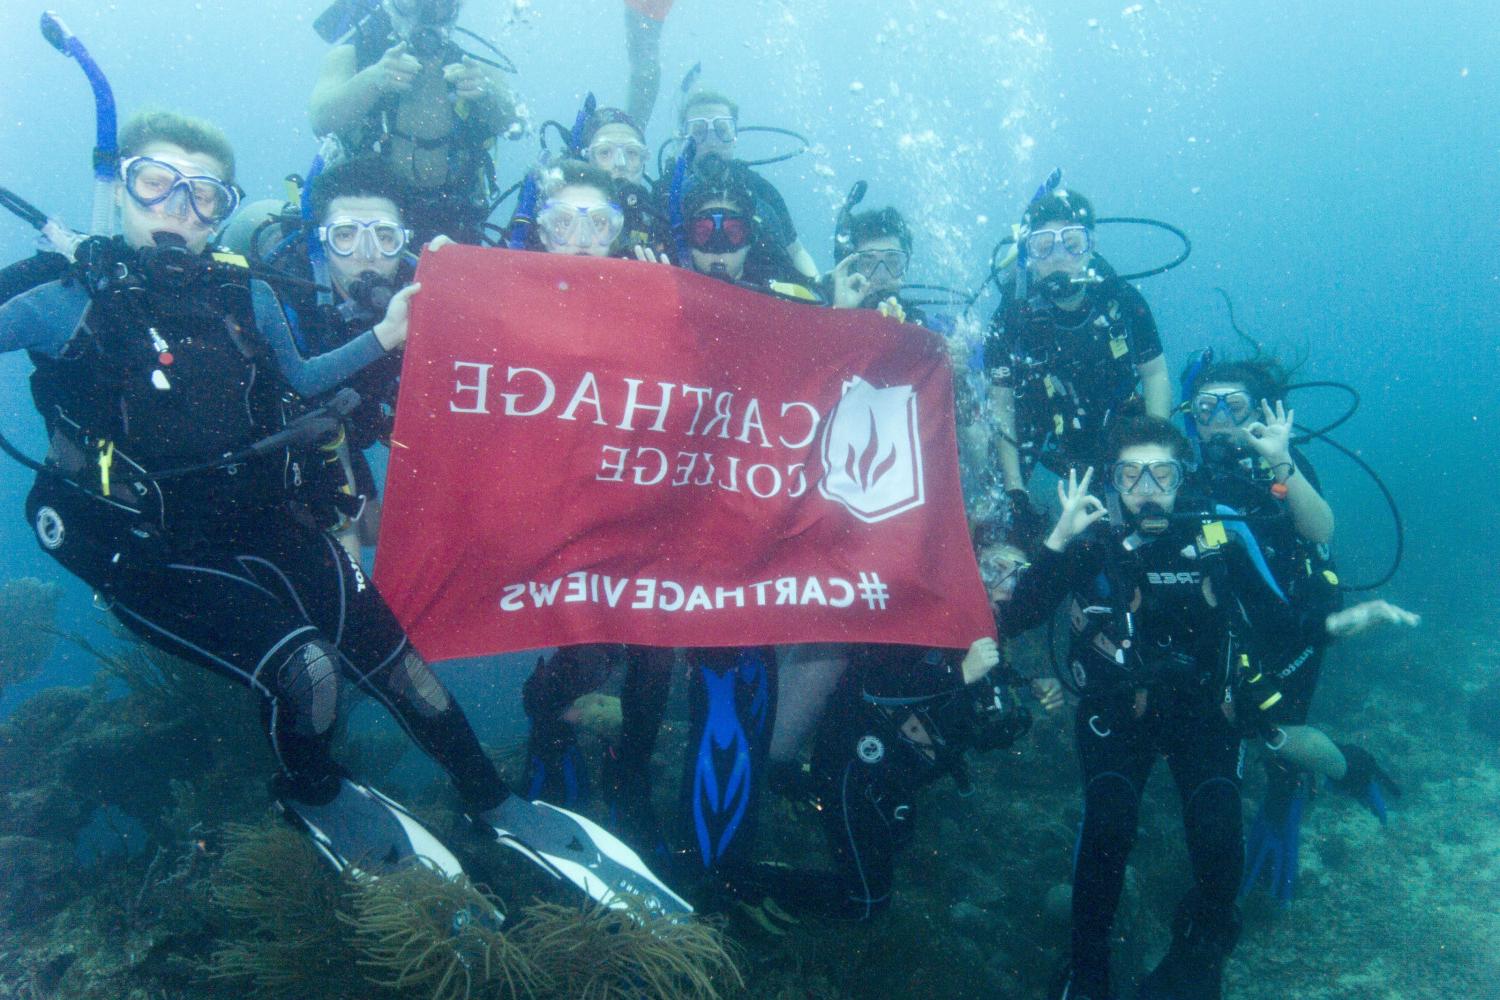 Students hold a Carthage flag while scuba diving on the J-Term study tour to Honduras.